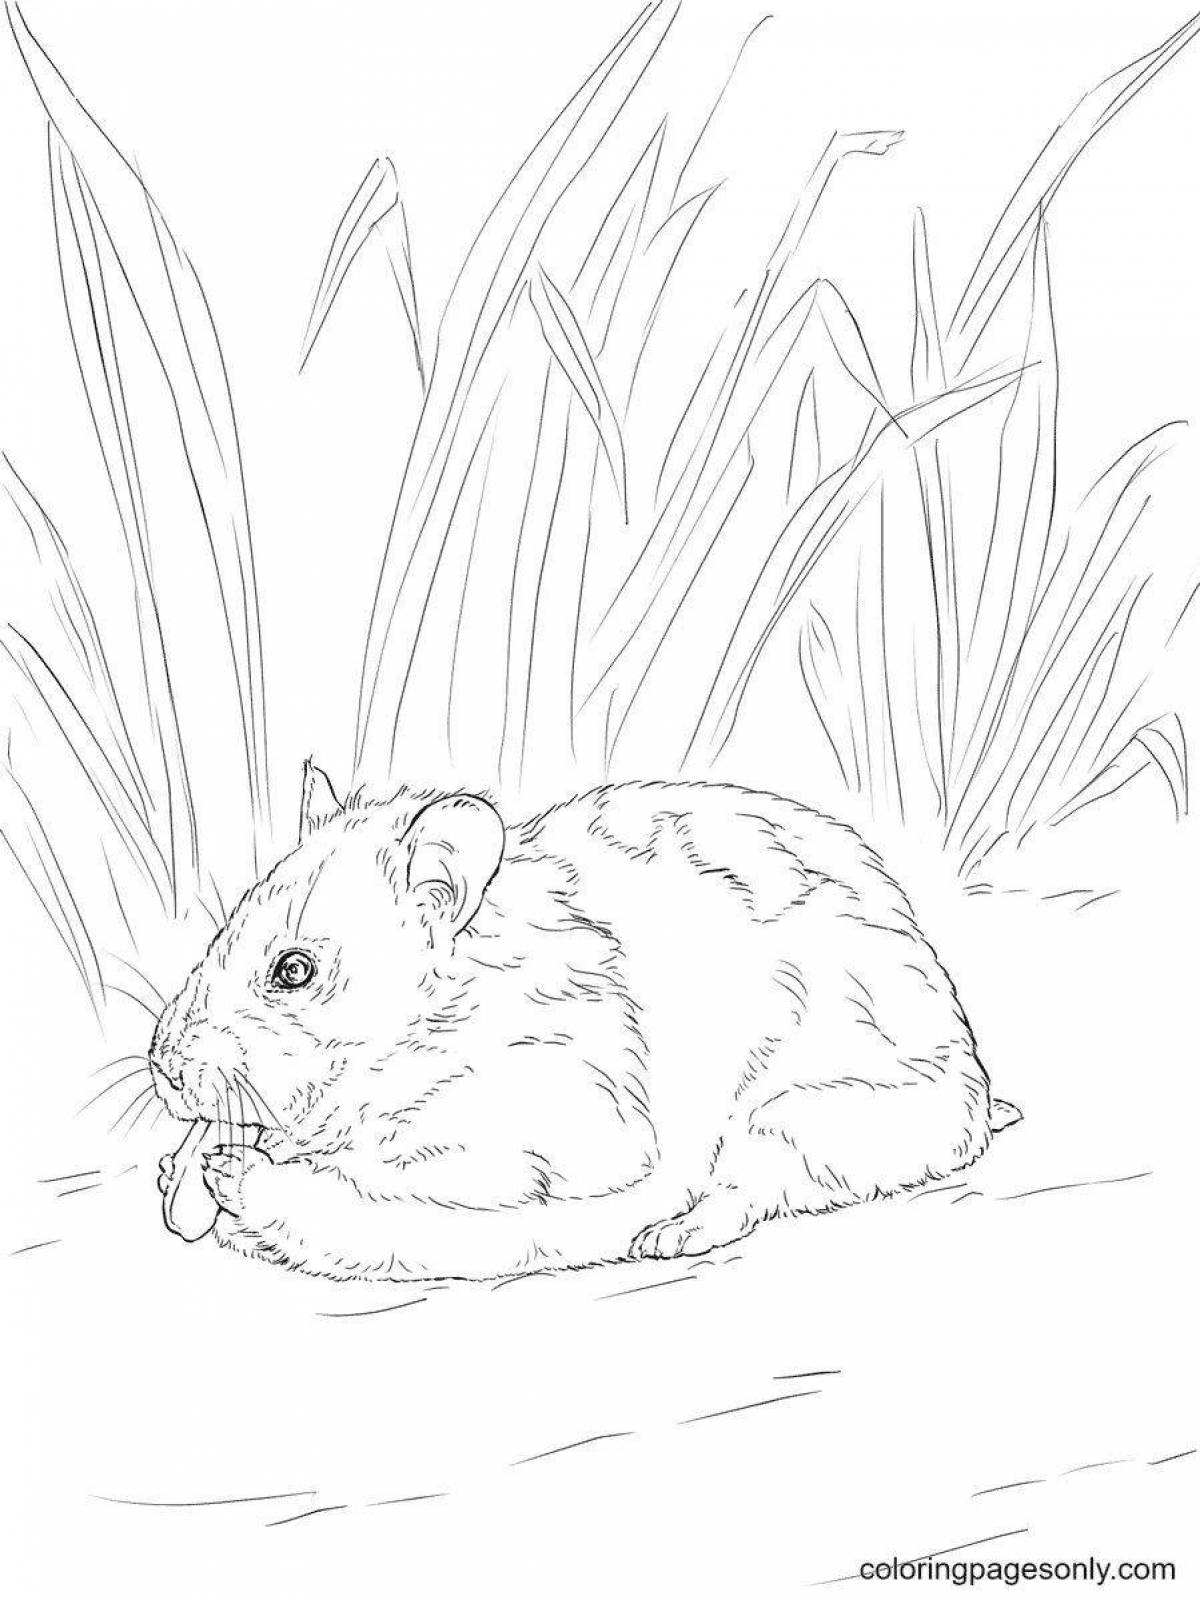 Hamster funny coloring book